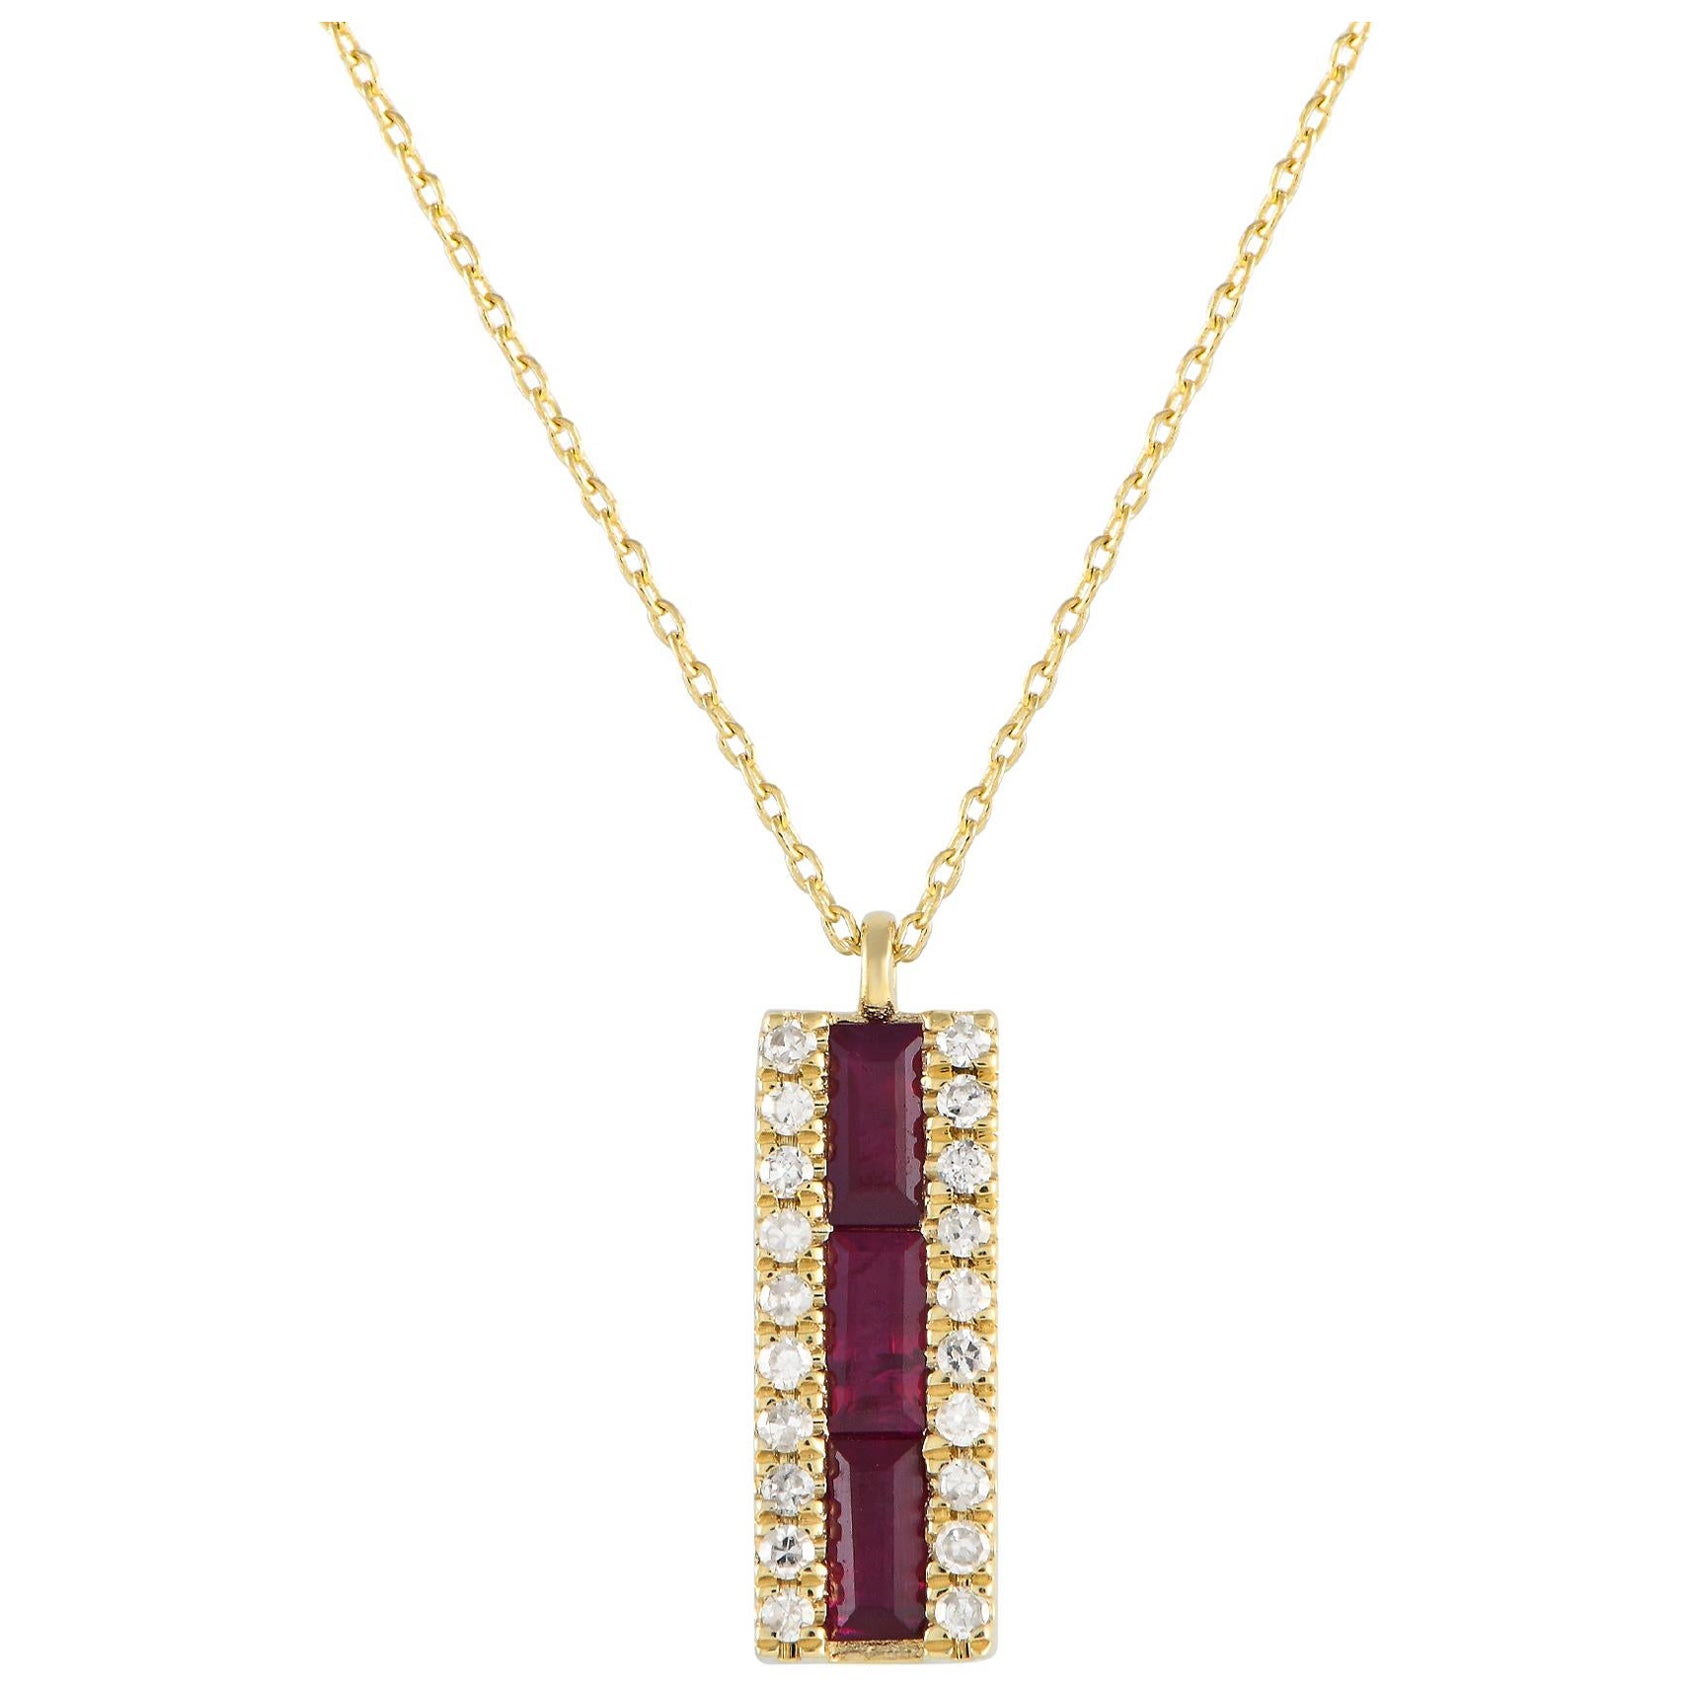 LB Exclusive 14K Yellow Gold 0.10ct Diamond & Ruby Pendant Necklace PD4-16063YRU For Sale